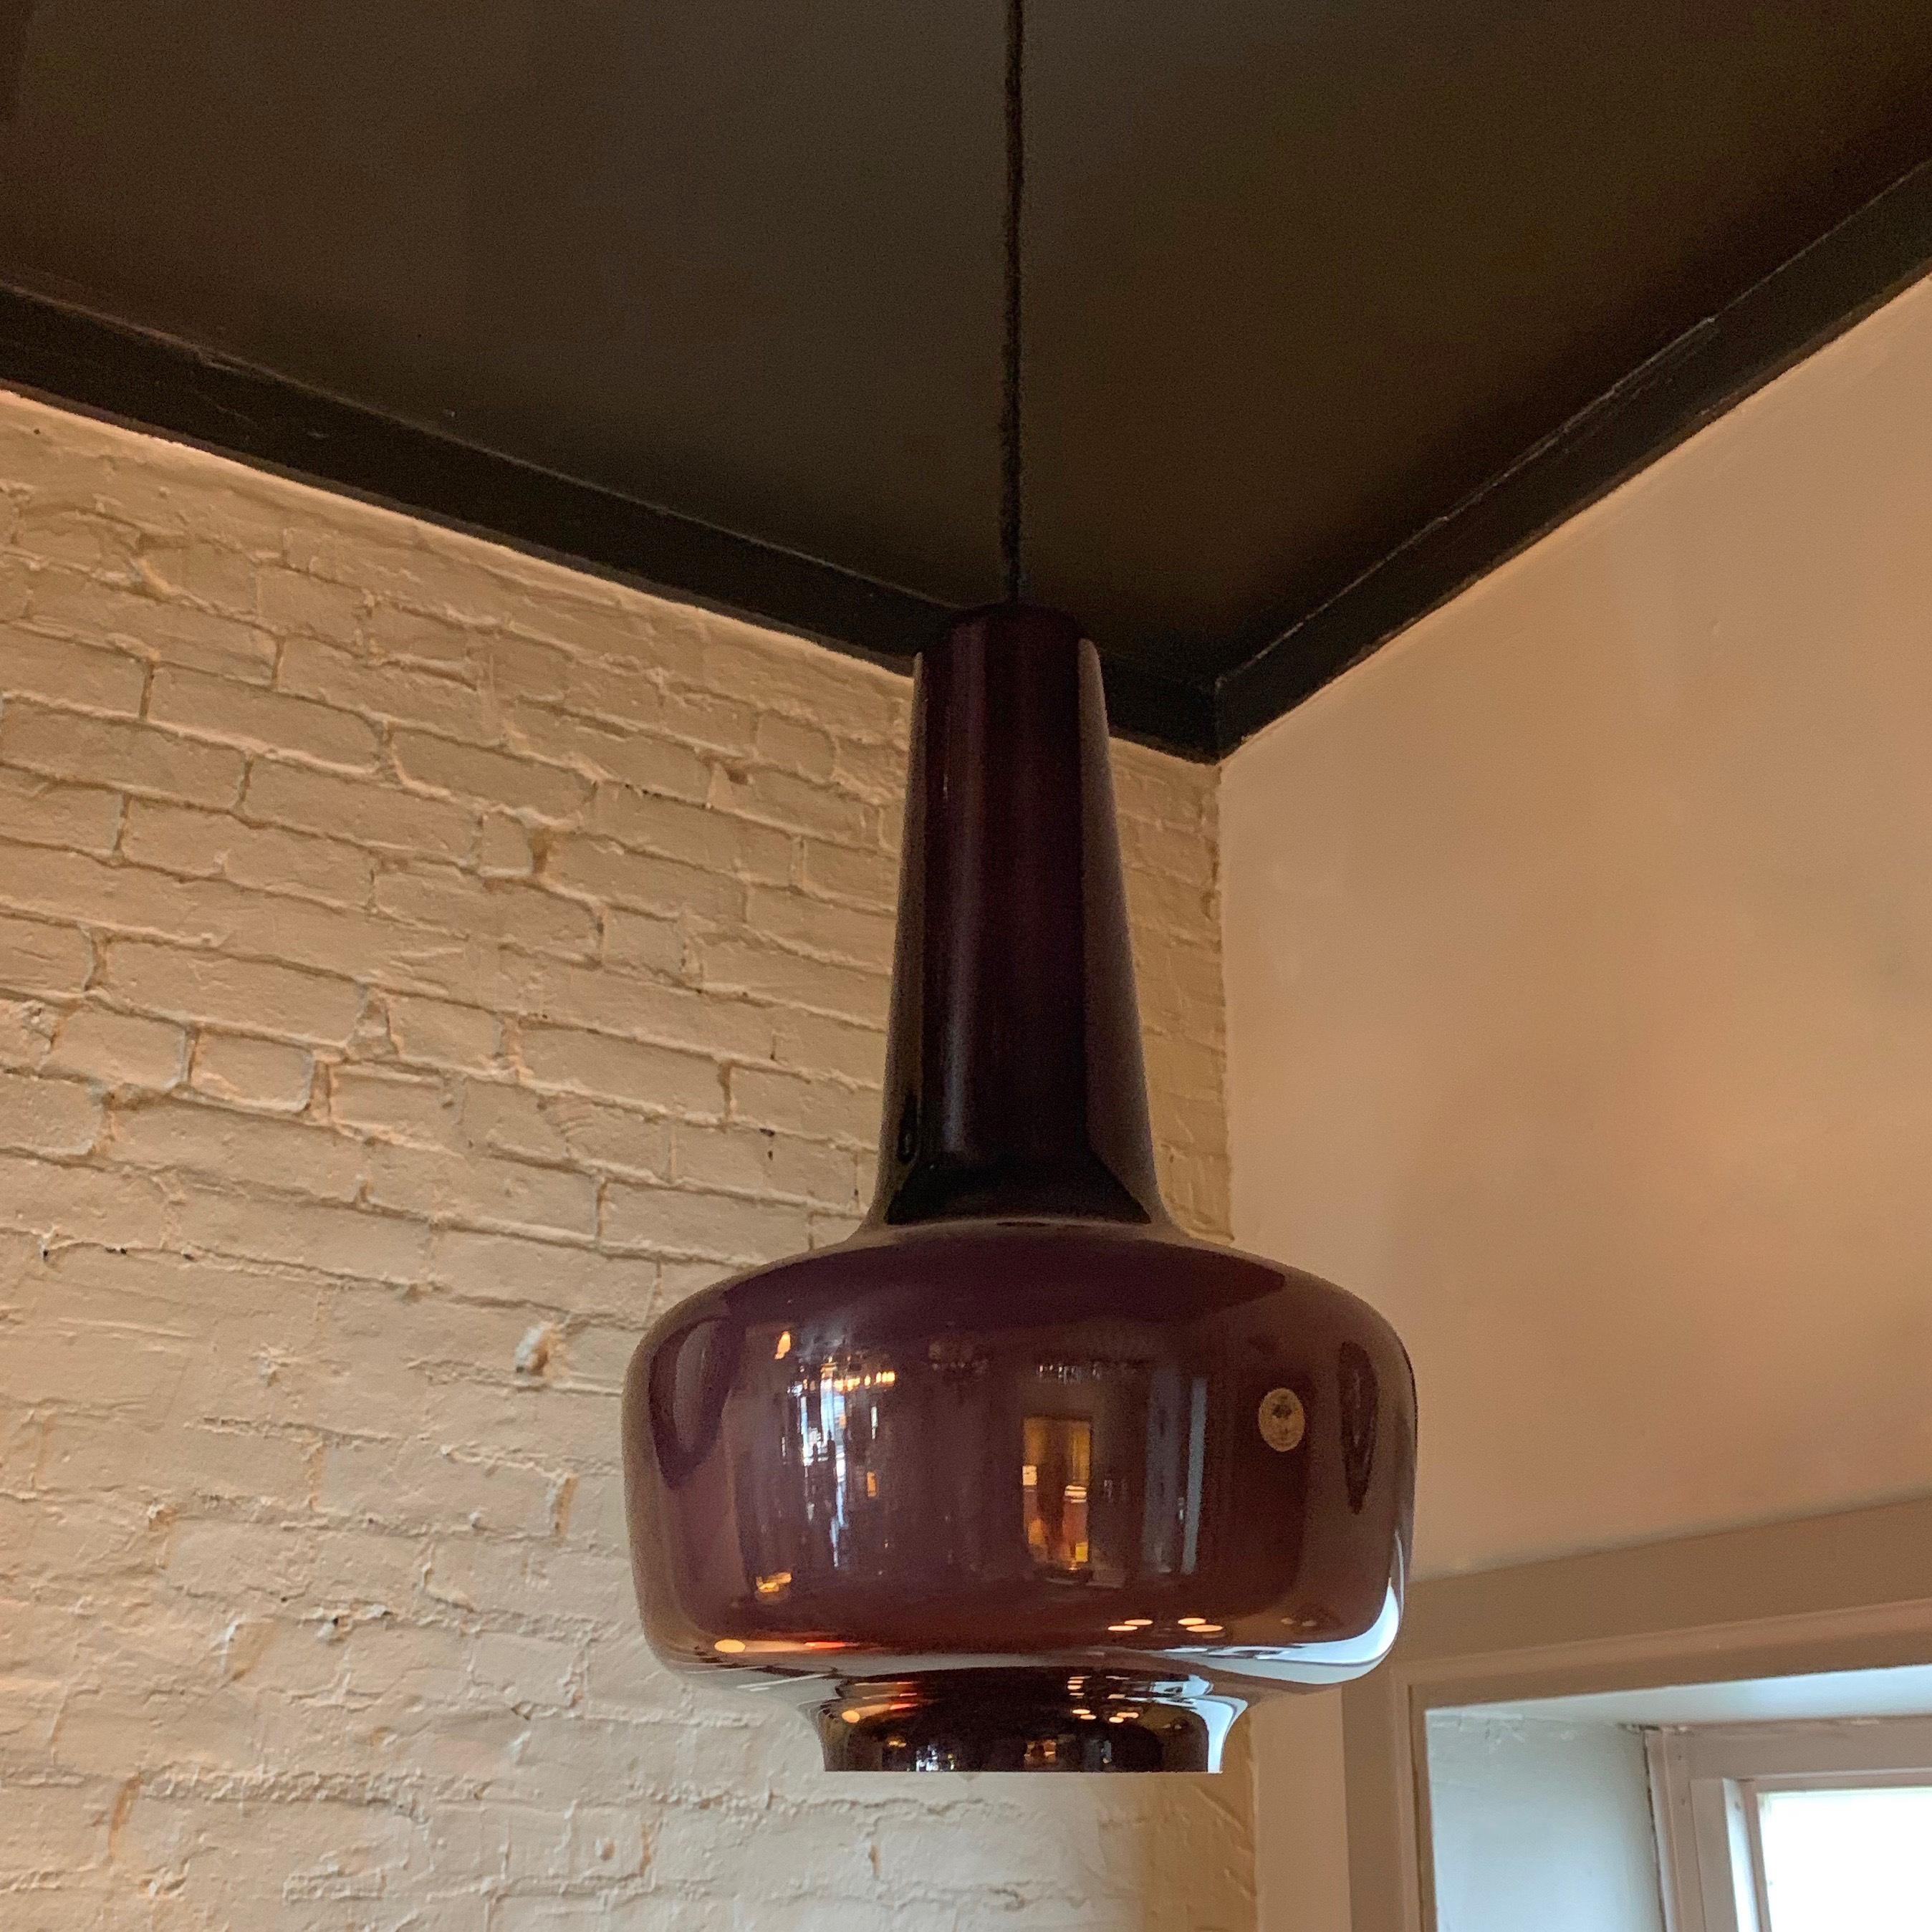 Danish modern, pendant light by Michael Bang for Holmegaard features a purple glass exterior and white glass interior that casts an opaque glow when lit.